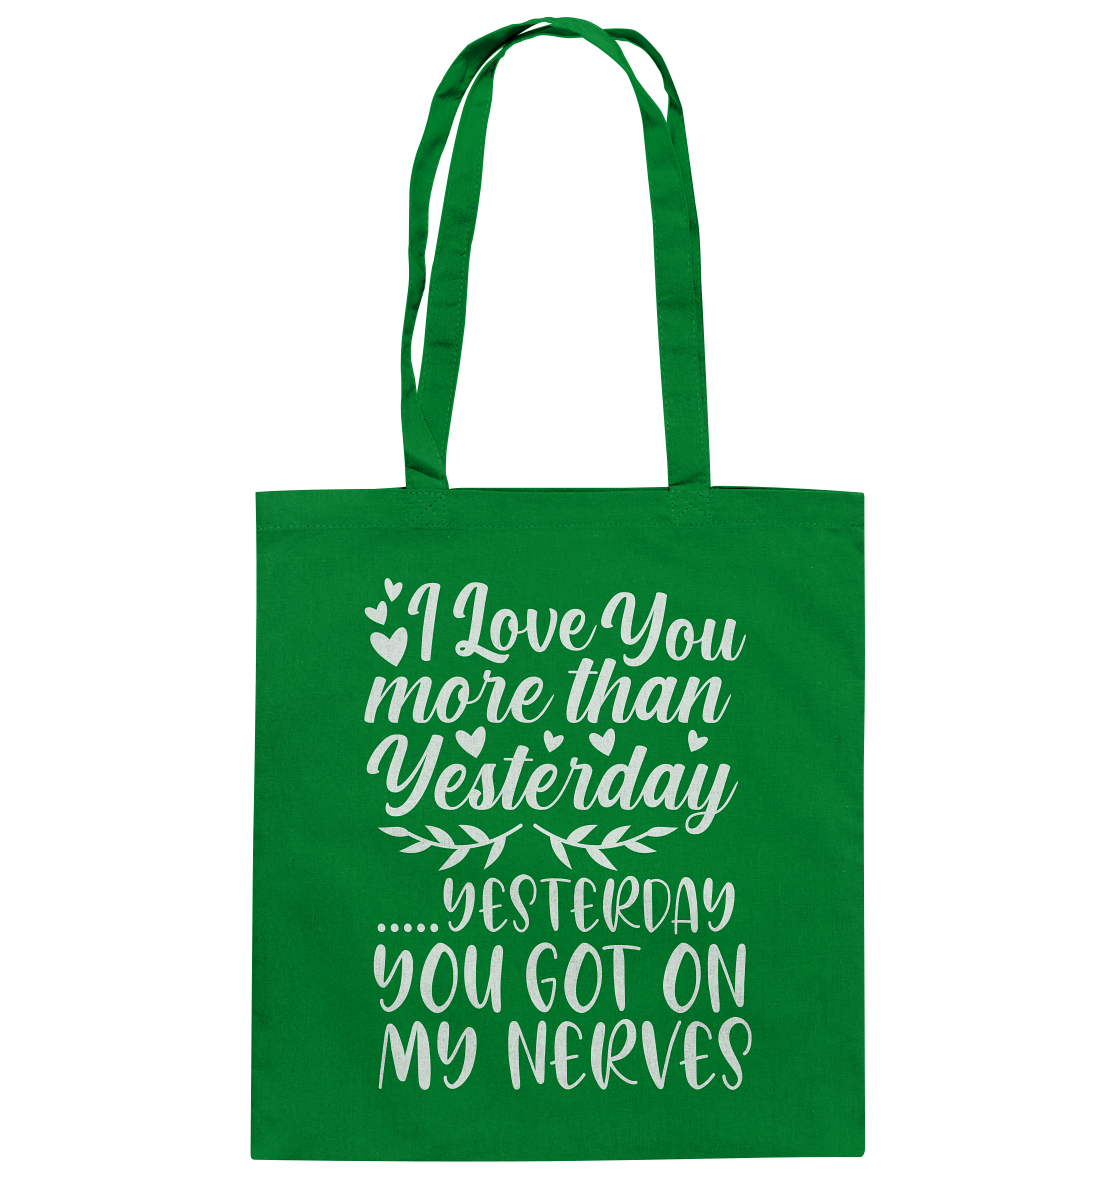 I love you more than yesterday - cotton bag